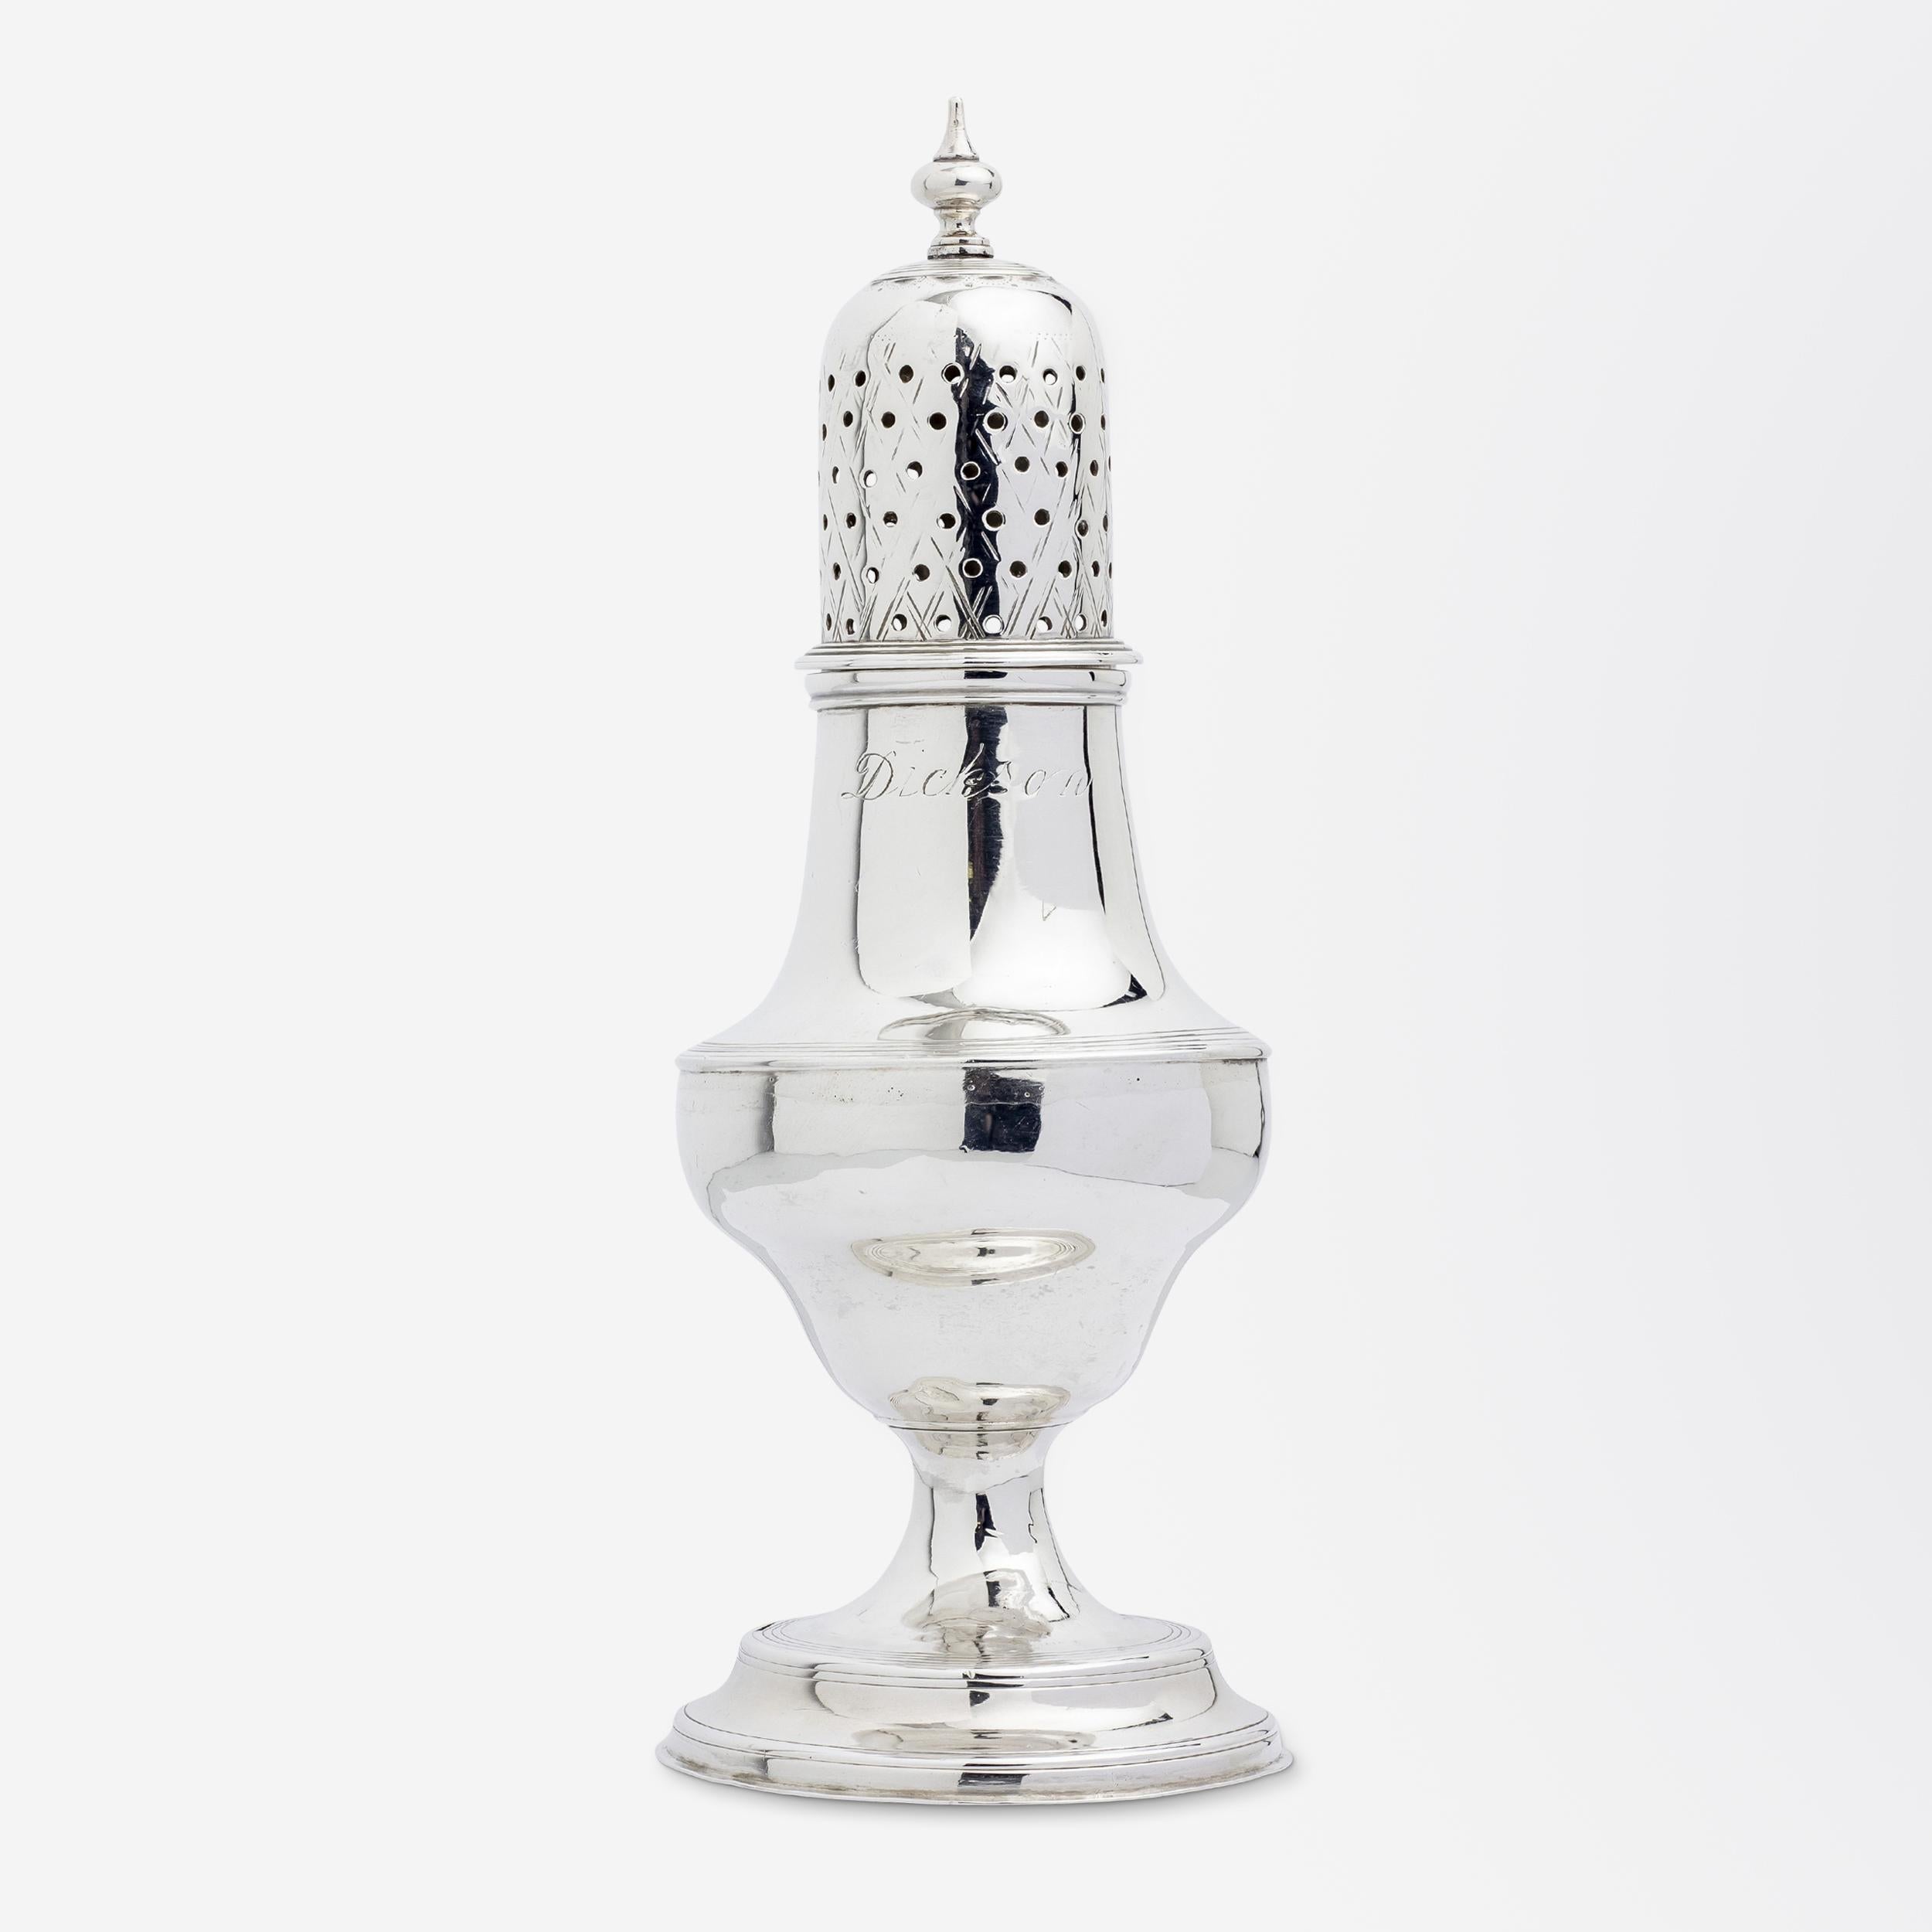 A George III period sterling silver sugar shaker by members of the famed English silversmithing family, The Batemans. Although slightly rubbed, the hallmarks indicate manufacture from London in 1808 by Hester Bateman's son Peter and grandson William